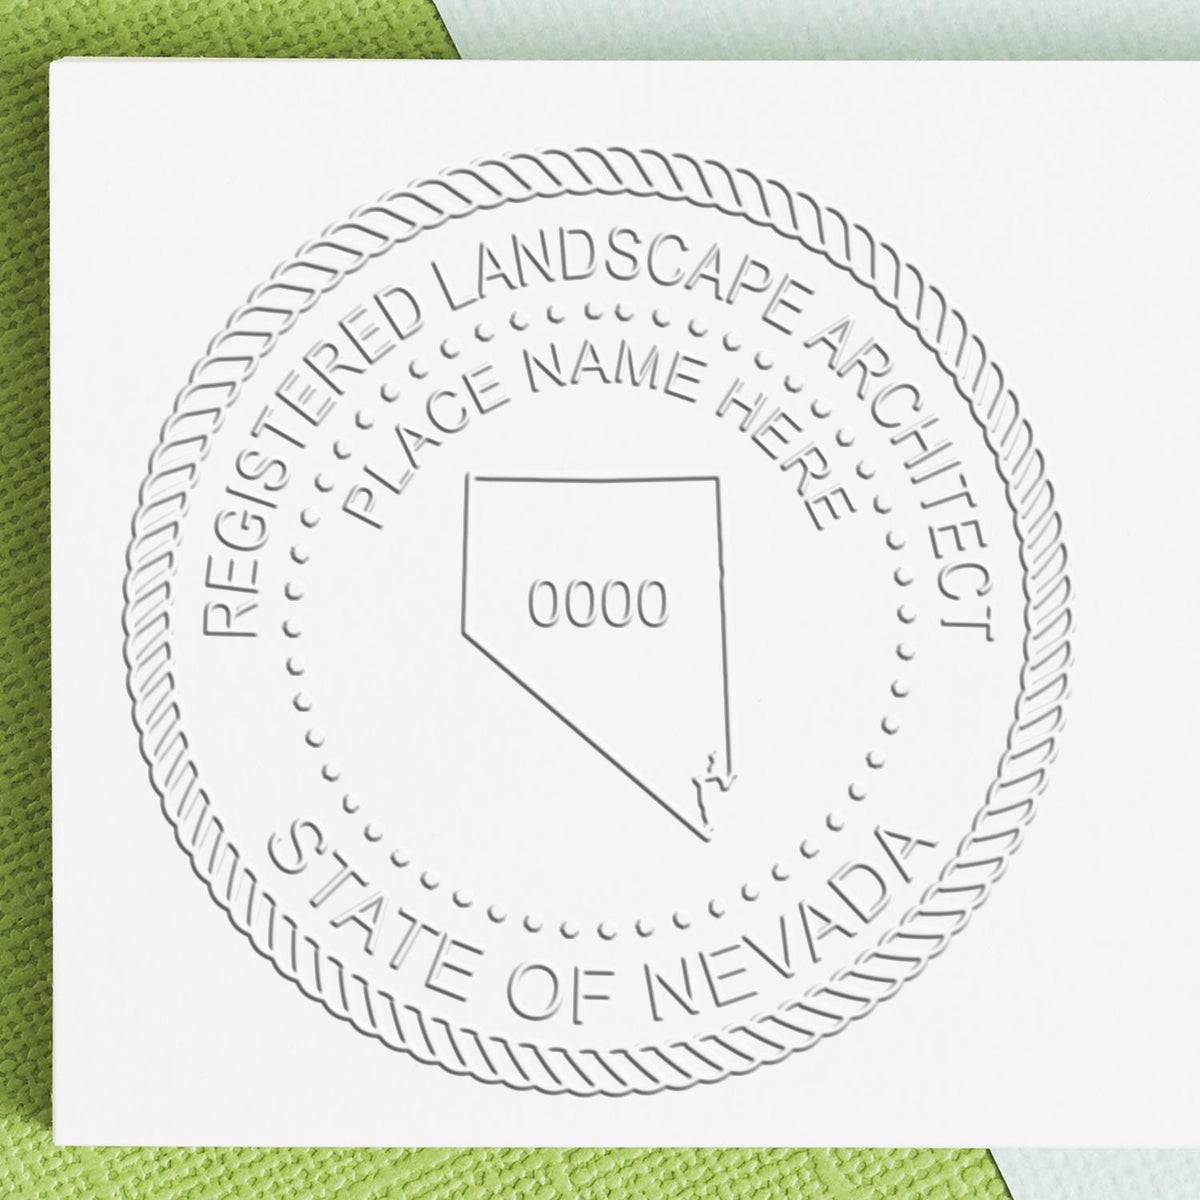 The Gift Nevada Landscape Architect Seal stamp impression comes to life with a crisp, detailed image stamped on paper - showcasing true professional quality.